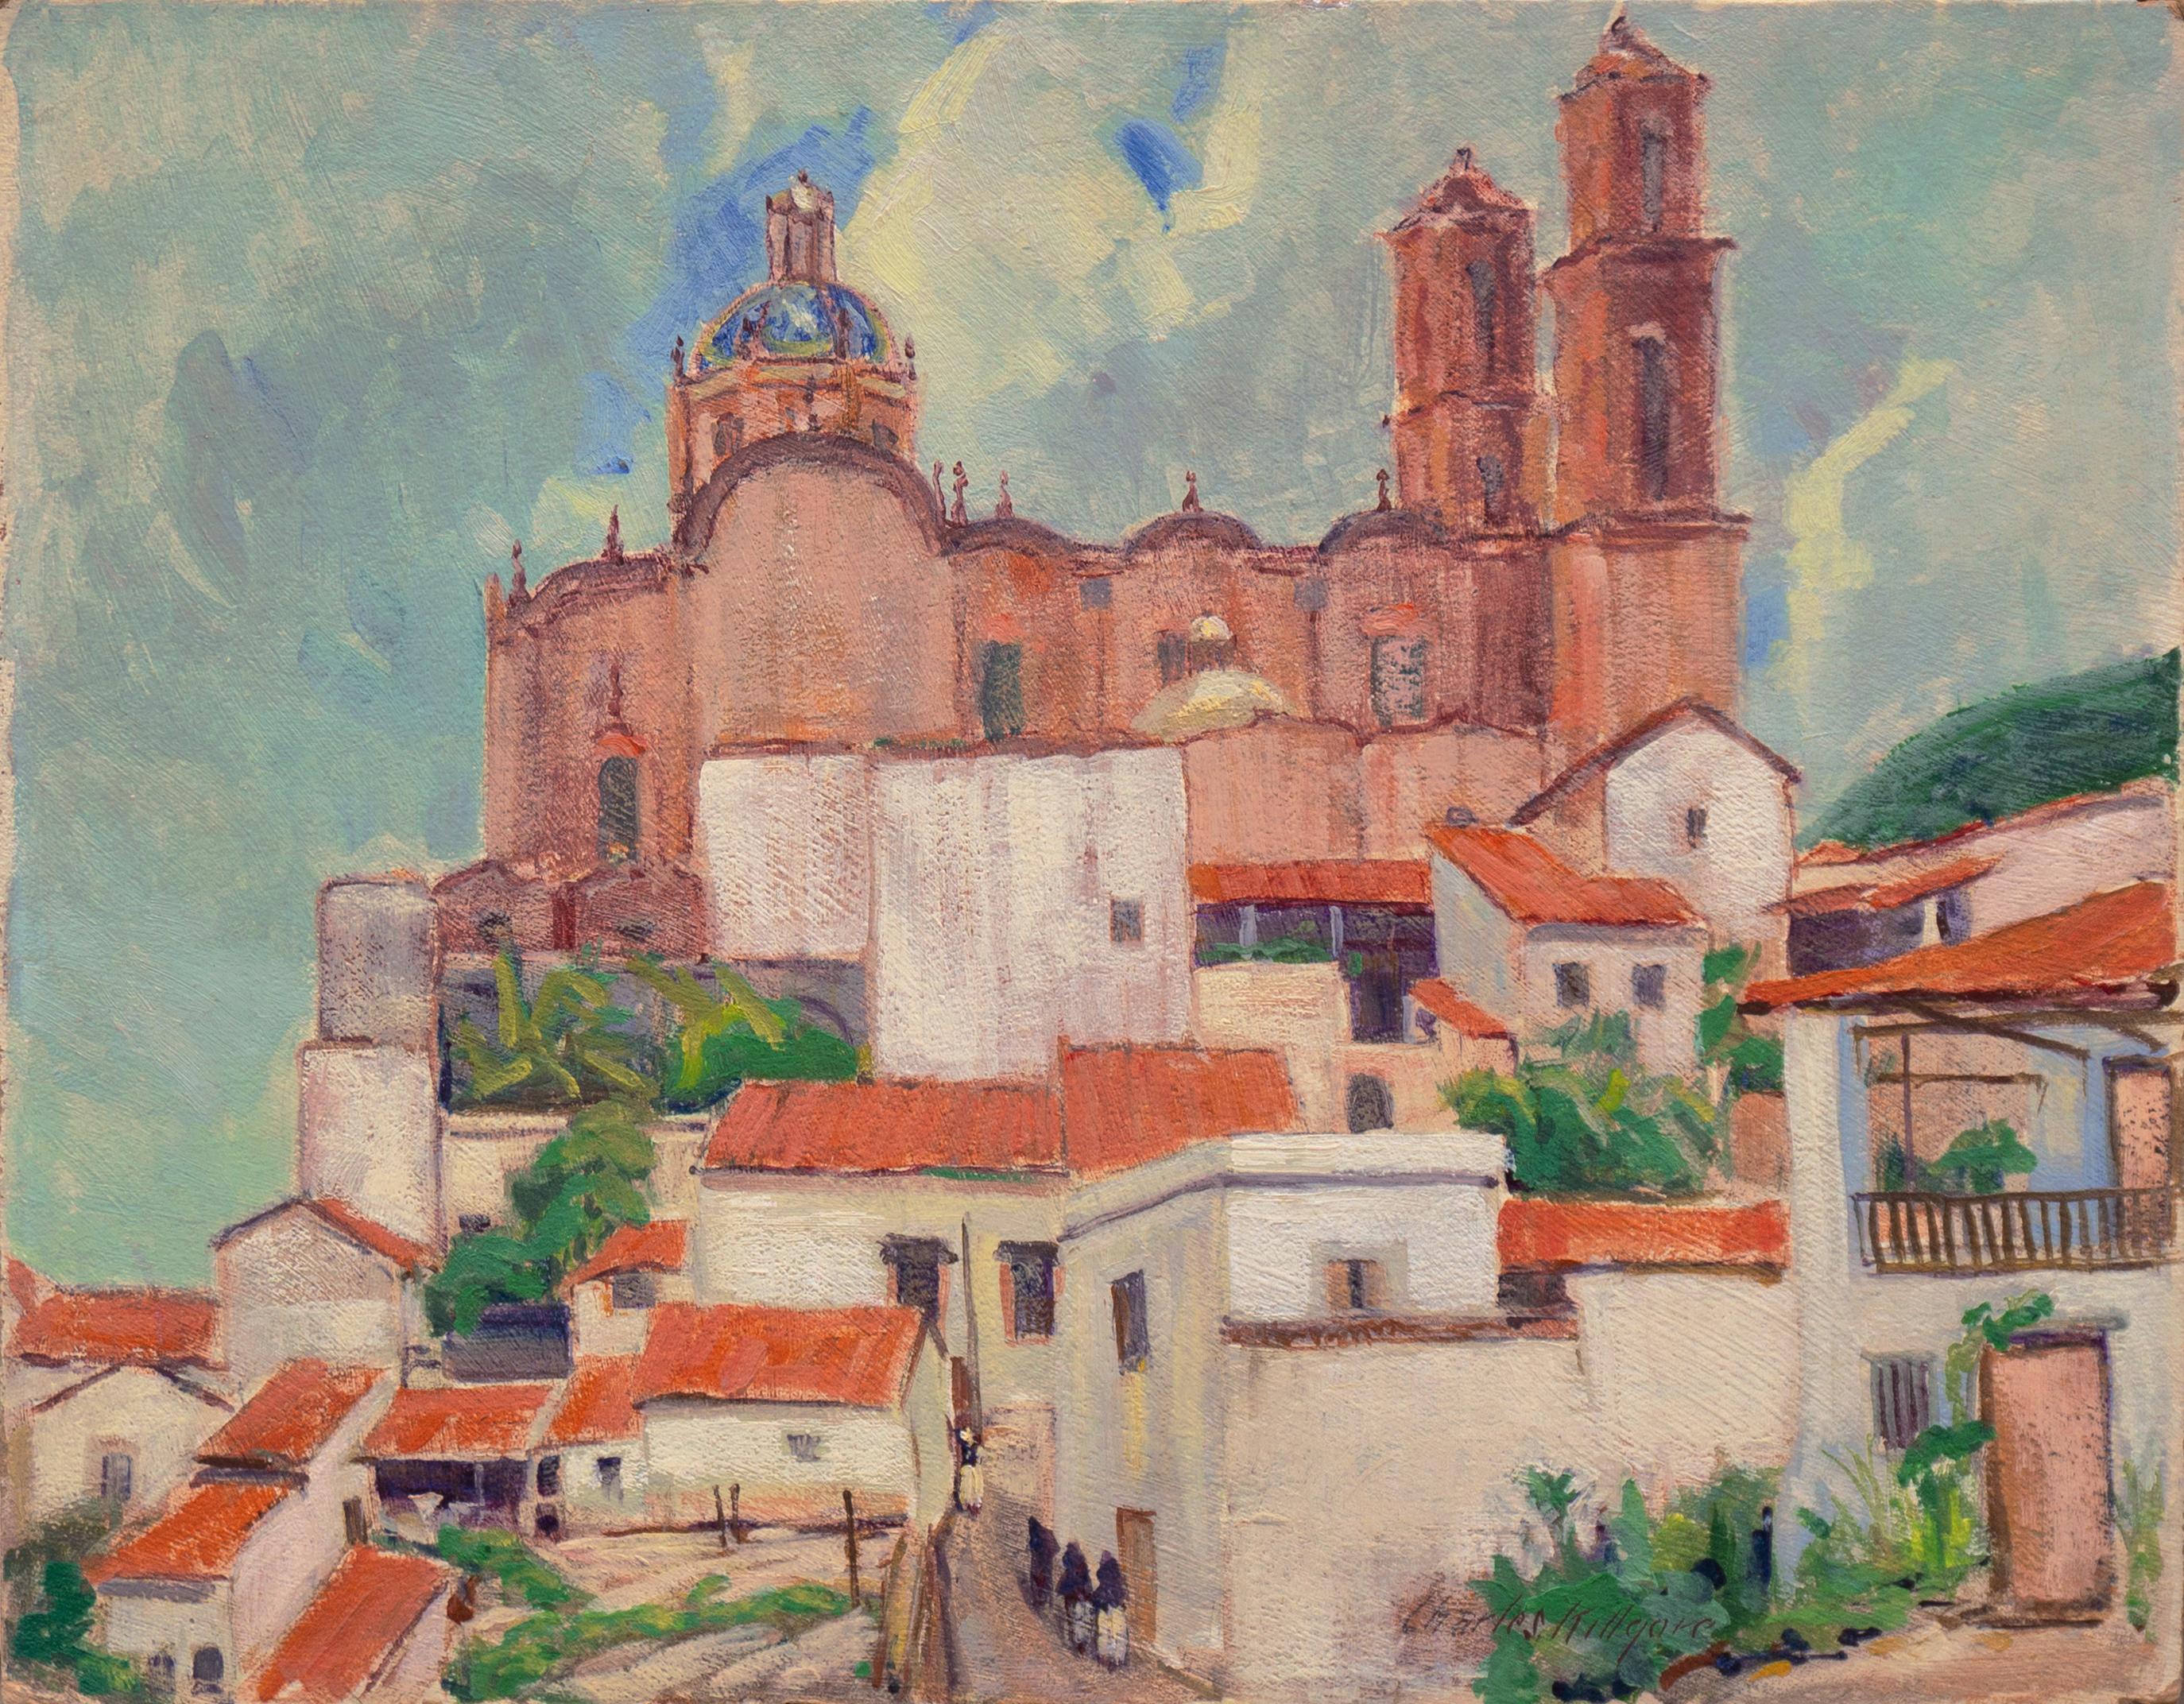 Charles Killgore Landscape Painting - 'Taxco, Mexico', Paris, Louvre, Who Was Who in American Art, PAFA, AIC